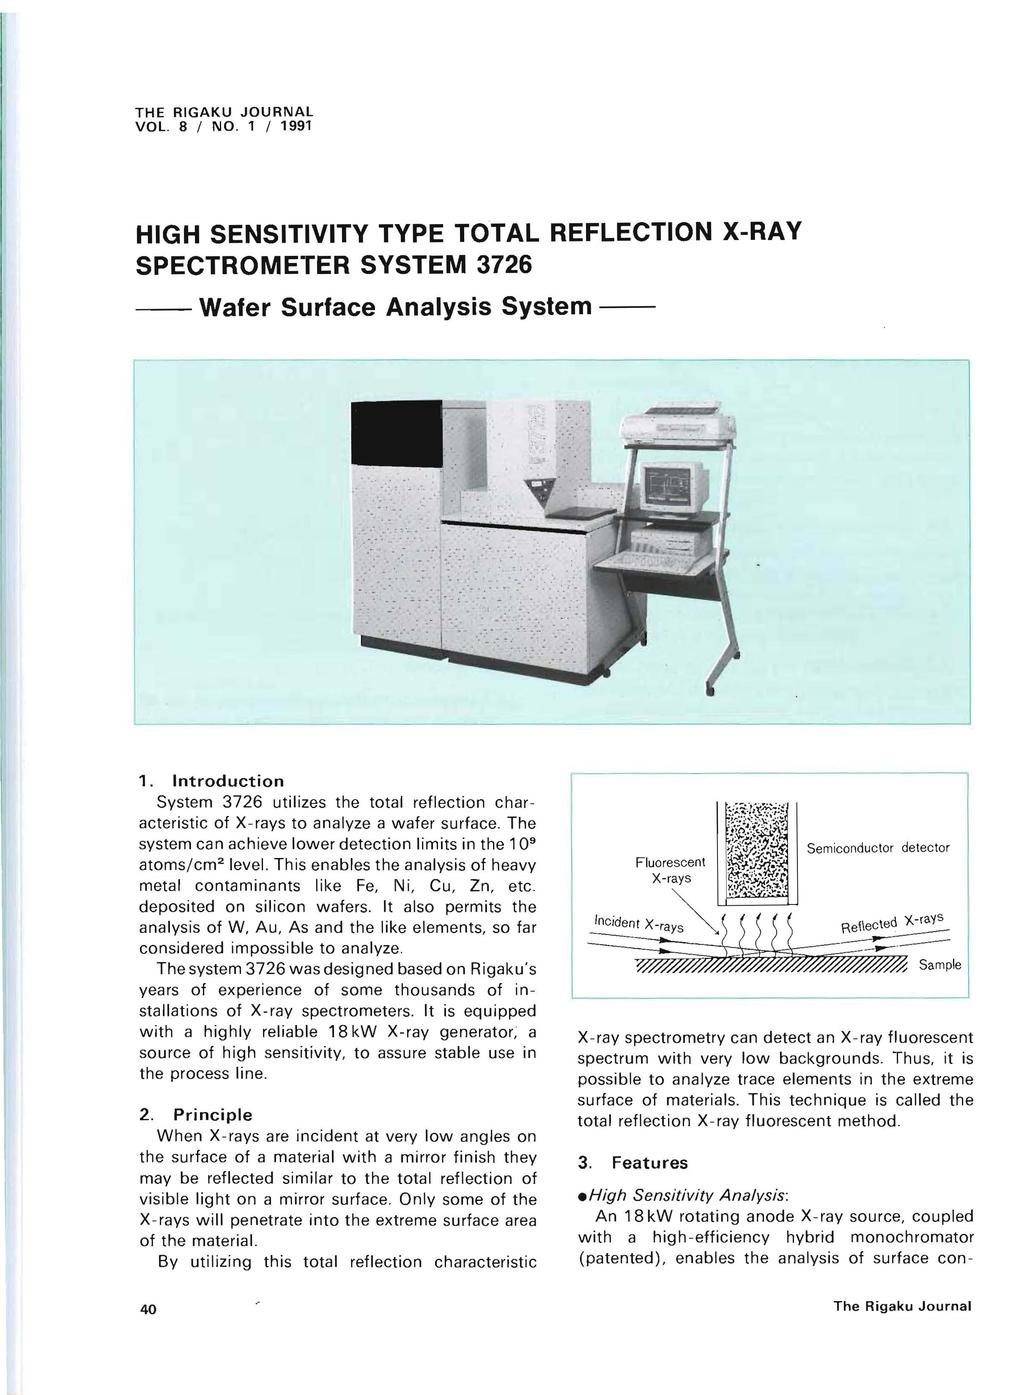 THE RIGAKU JOURNAL VOl. 8 / NO. 1 / 1991 HIGH SENSITIVITY TYPE TOTAL REFLECTION X-RAY SPECTROMETER SYSTEM 3726 --Wafer Surface Analysis System -- 1.